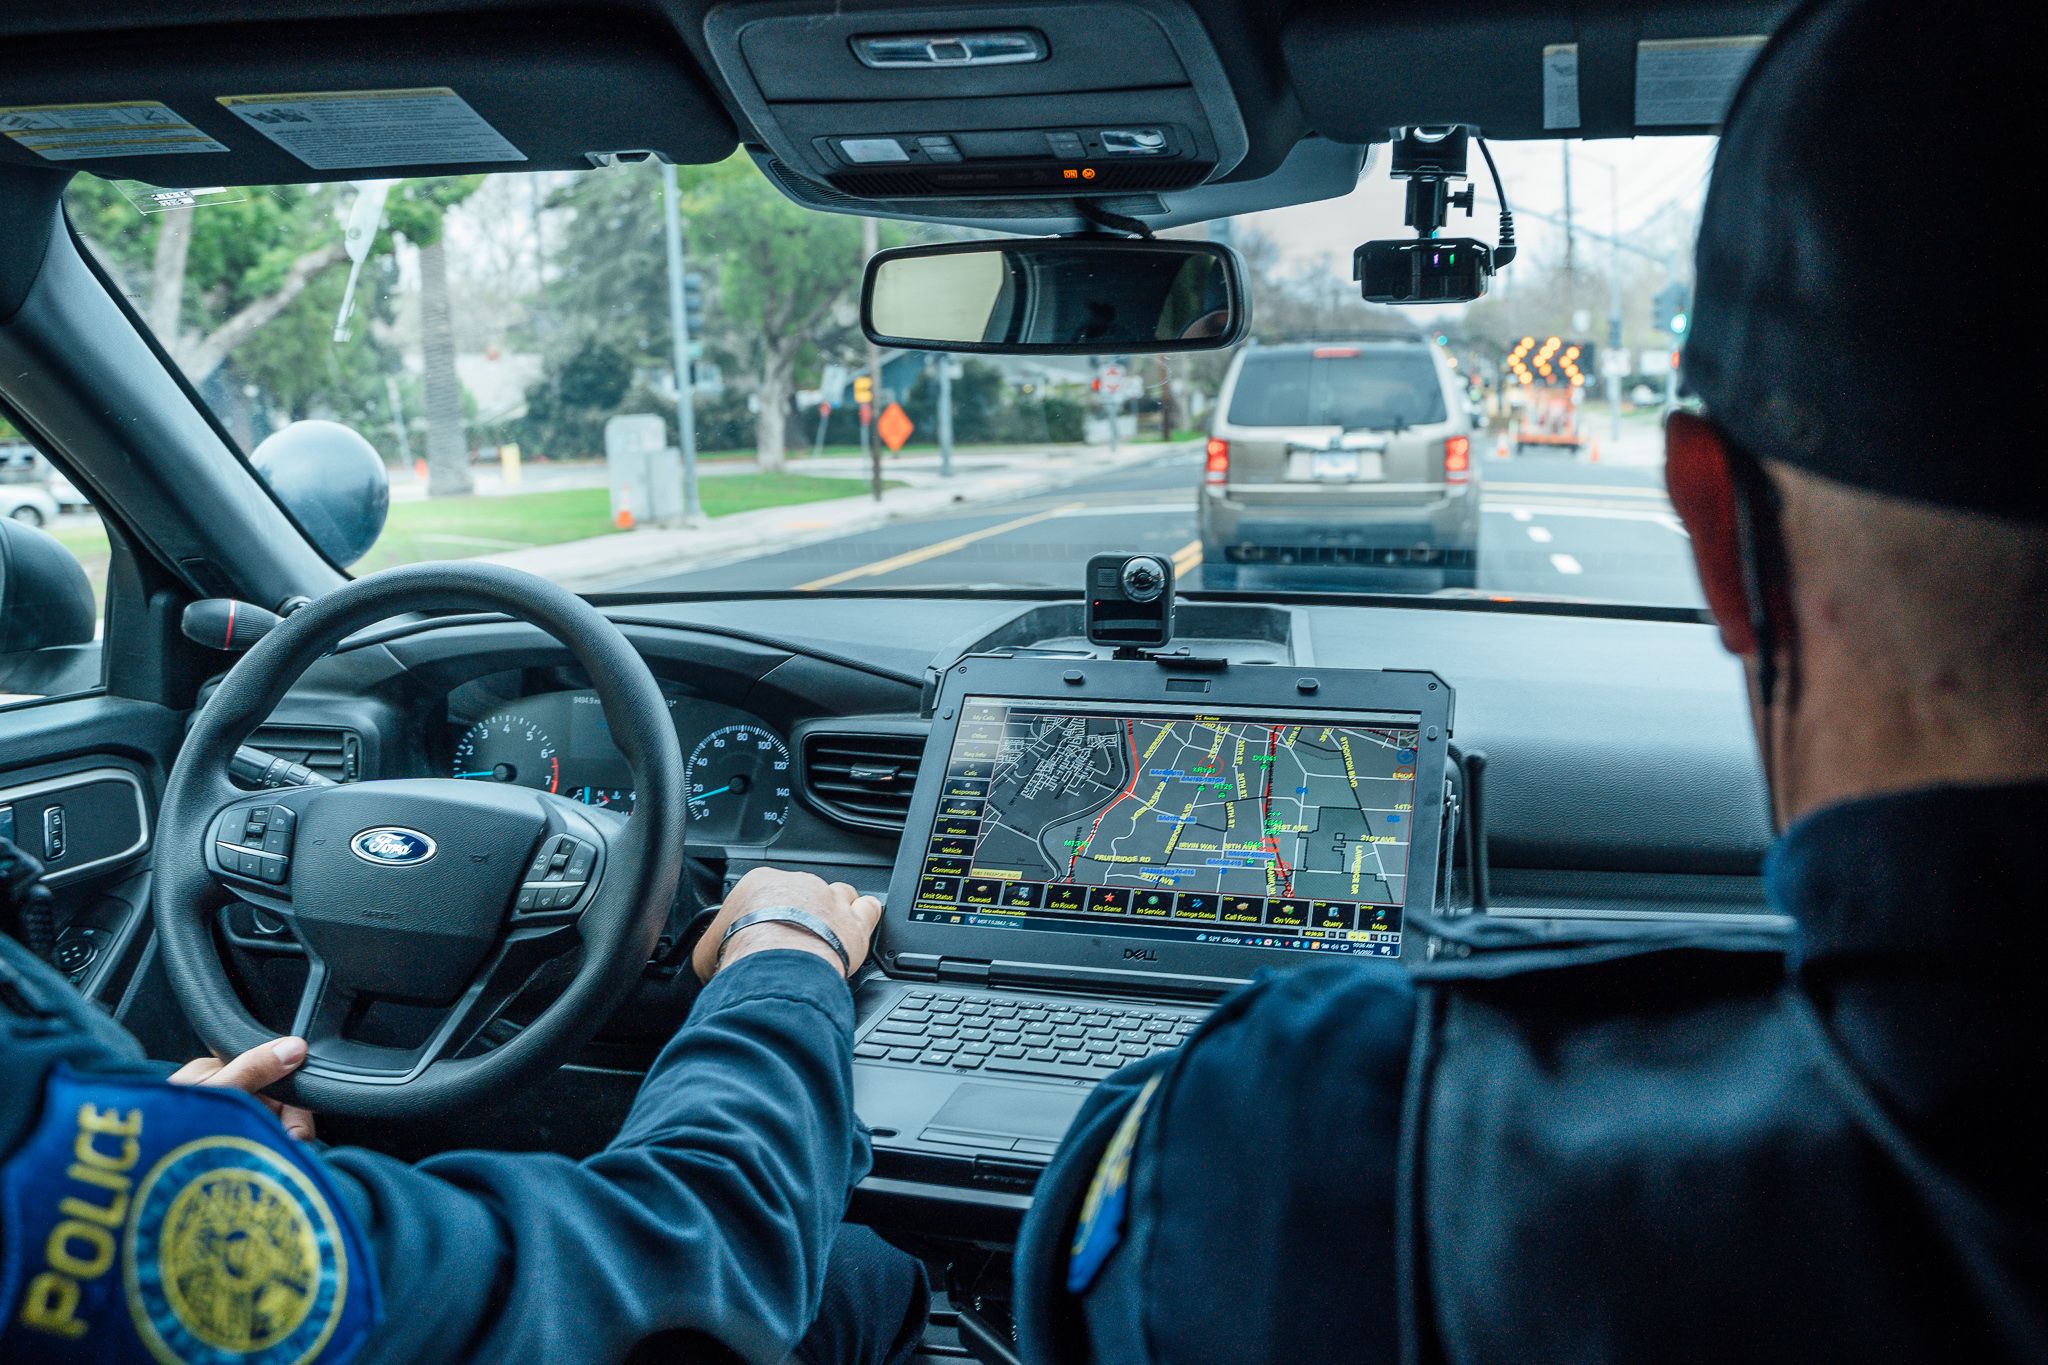 A photo off two officers on routine patrol in a police vehicle,  taken from the backseat of the car looking through the windshield, with a view of the back of the officers heads, their Sacramento Police uniform patches and in-car mounted computer's mapping system.